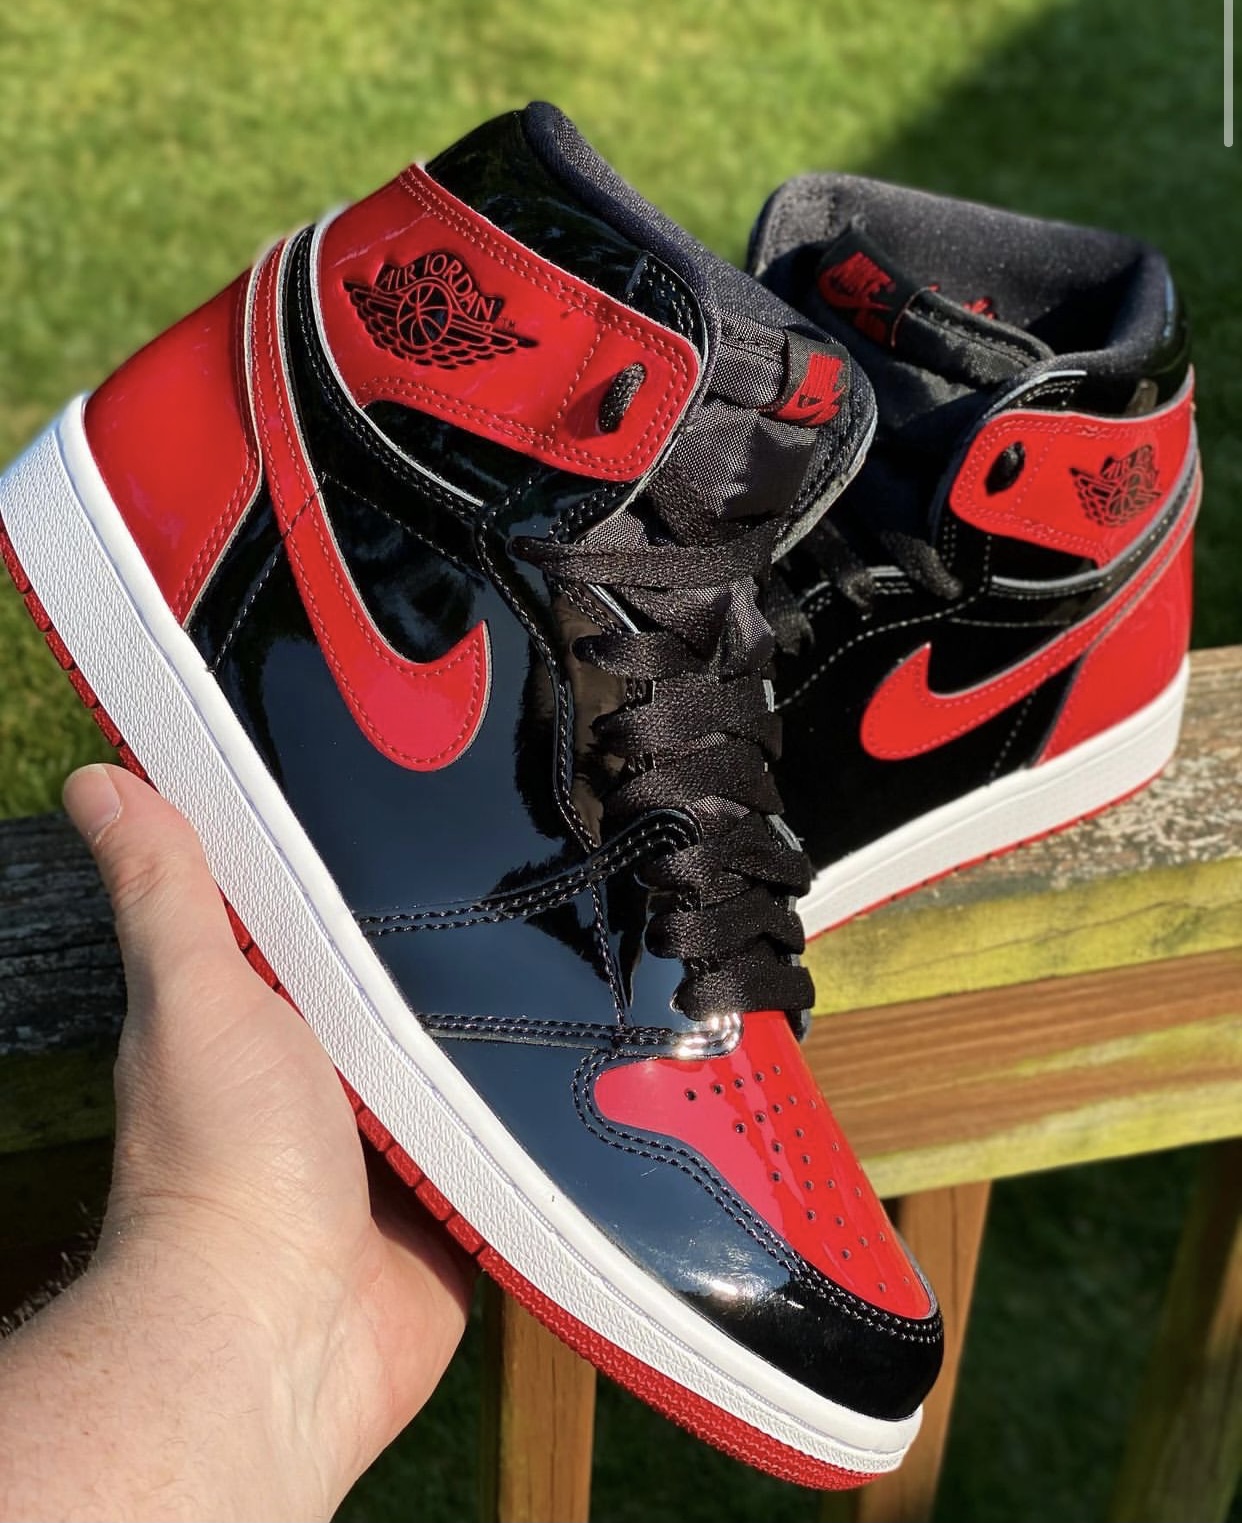 Air Jordan 1 Bred Patent Leather 555088-063 Release Date - SBD